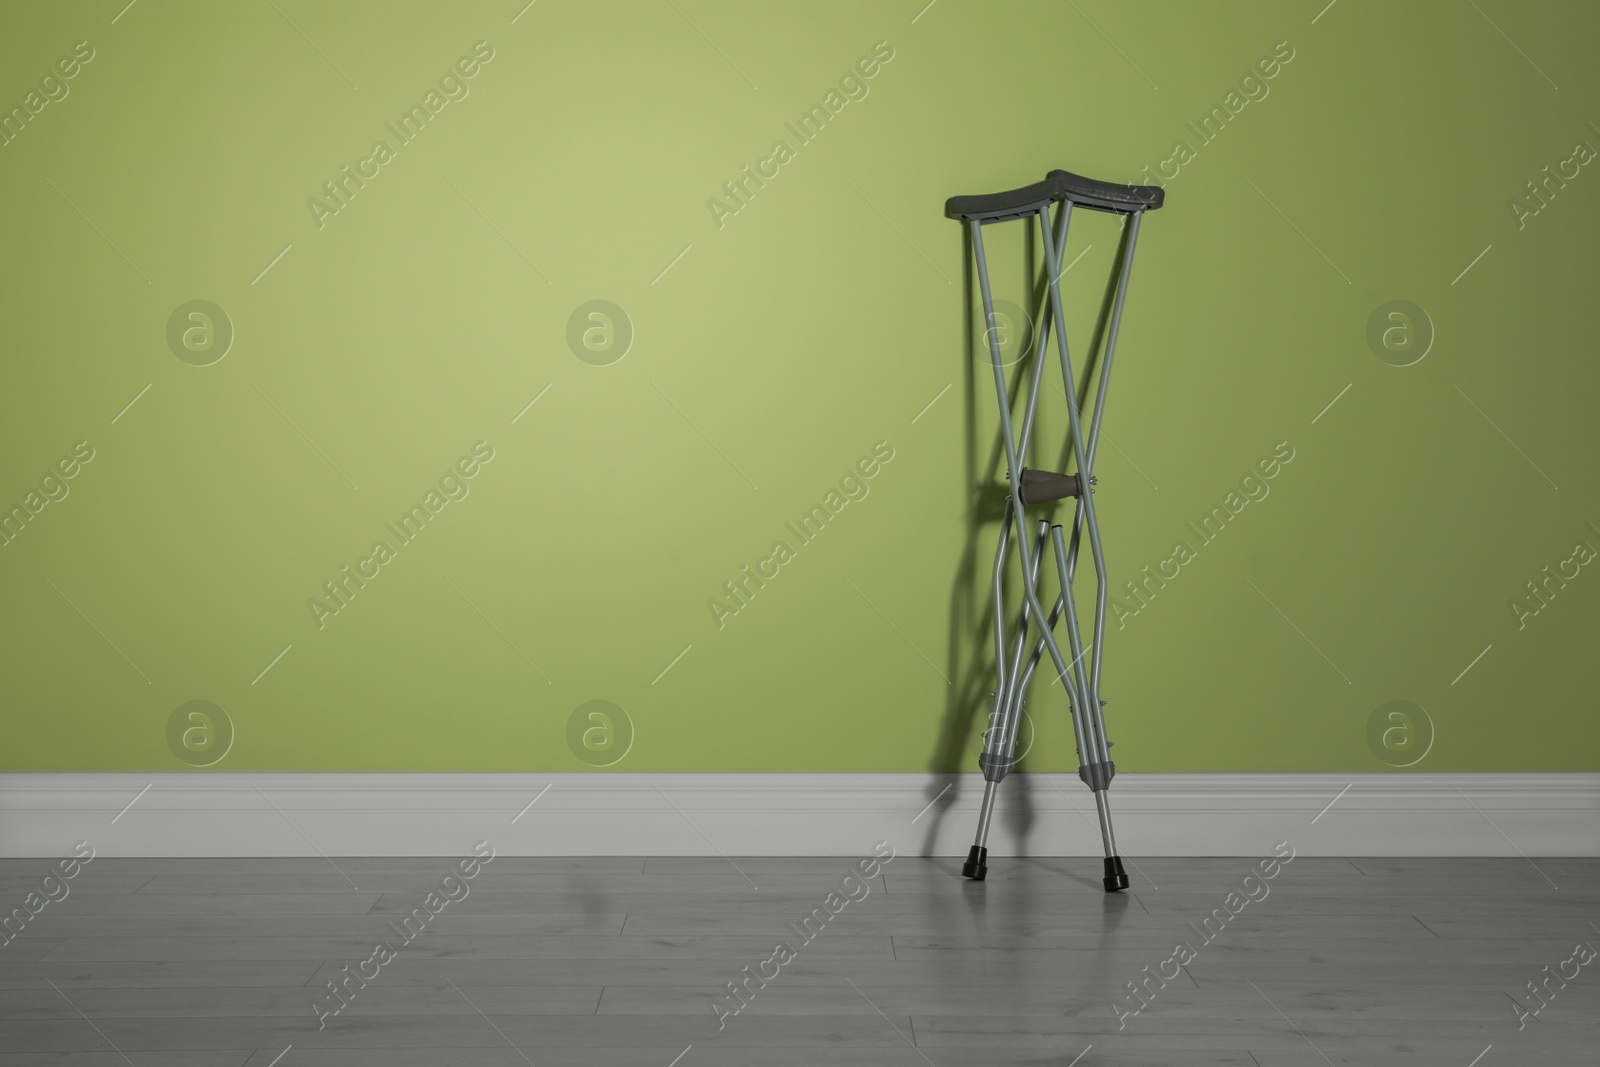 Photo of Pair of axillary crutches near light green wall. Space for text